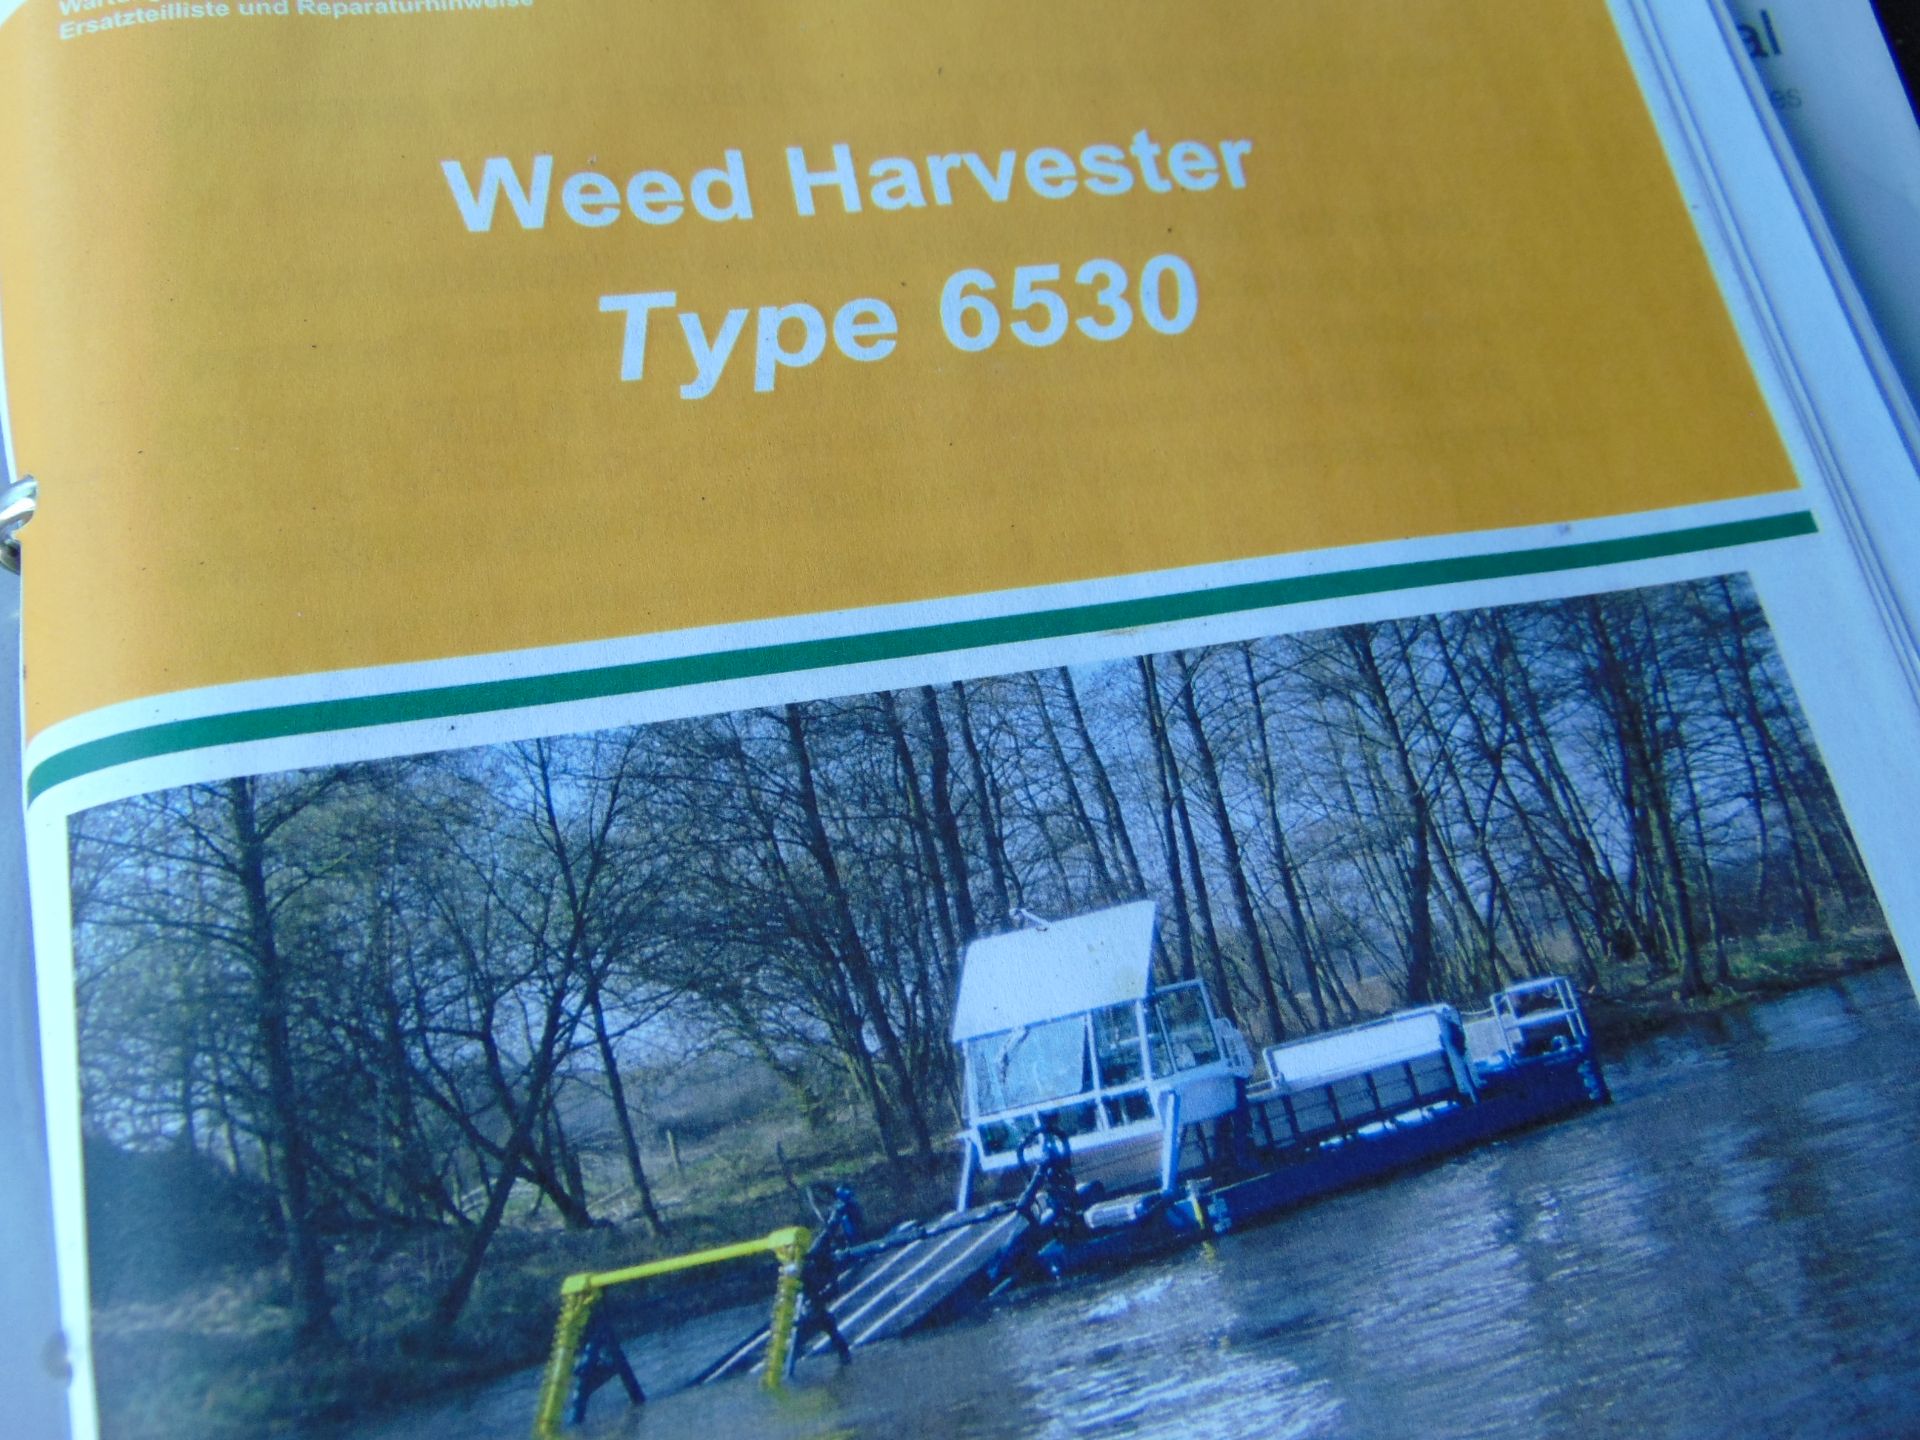 2012 Berky Type 6530 Aquatic Weed Harvester from the UK Environment Agency - Image 34 of 34